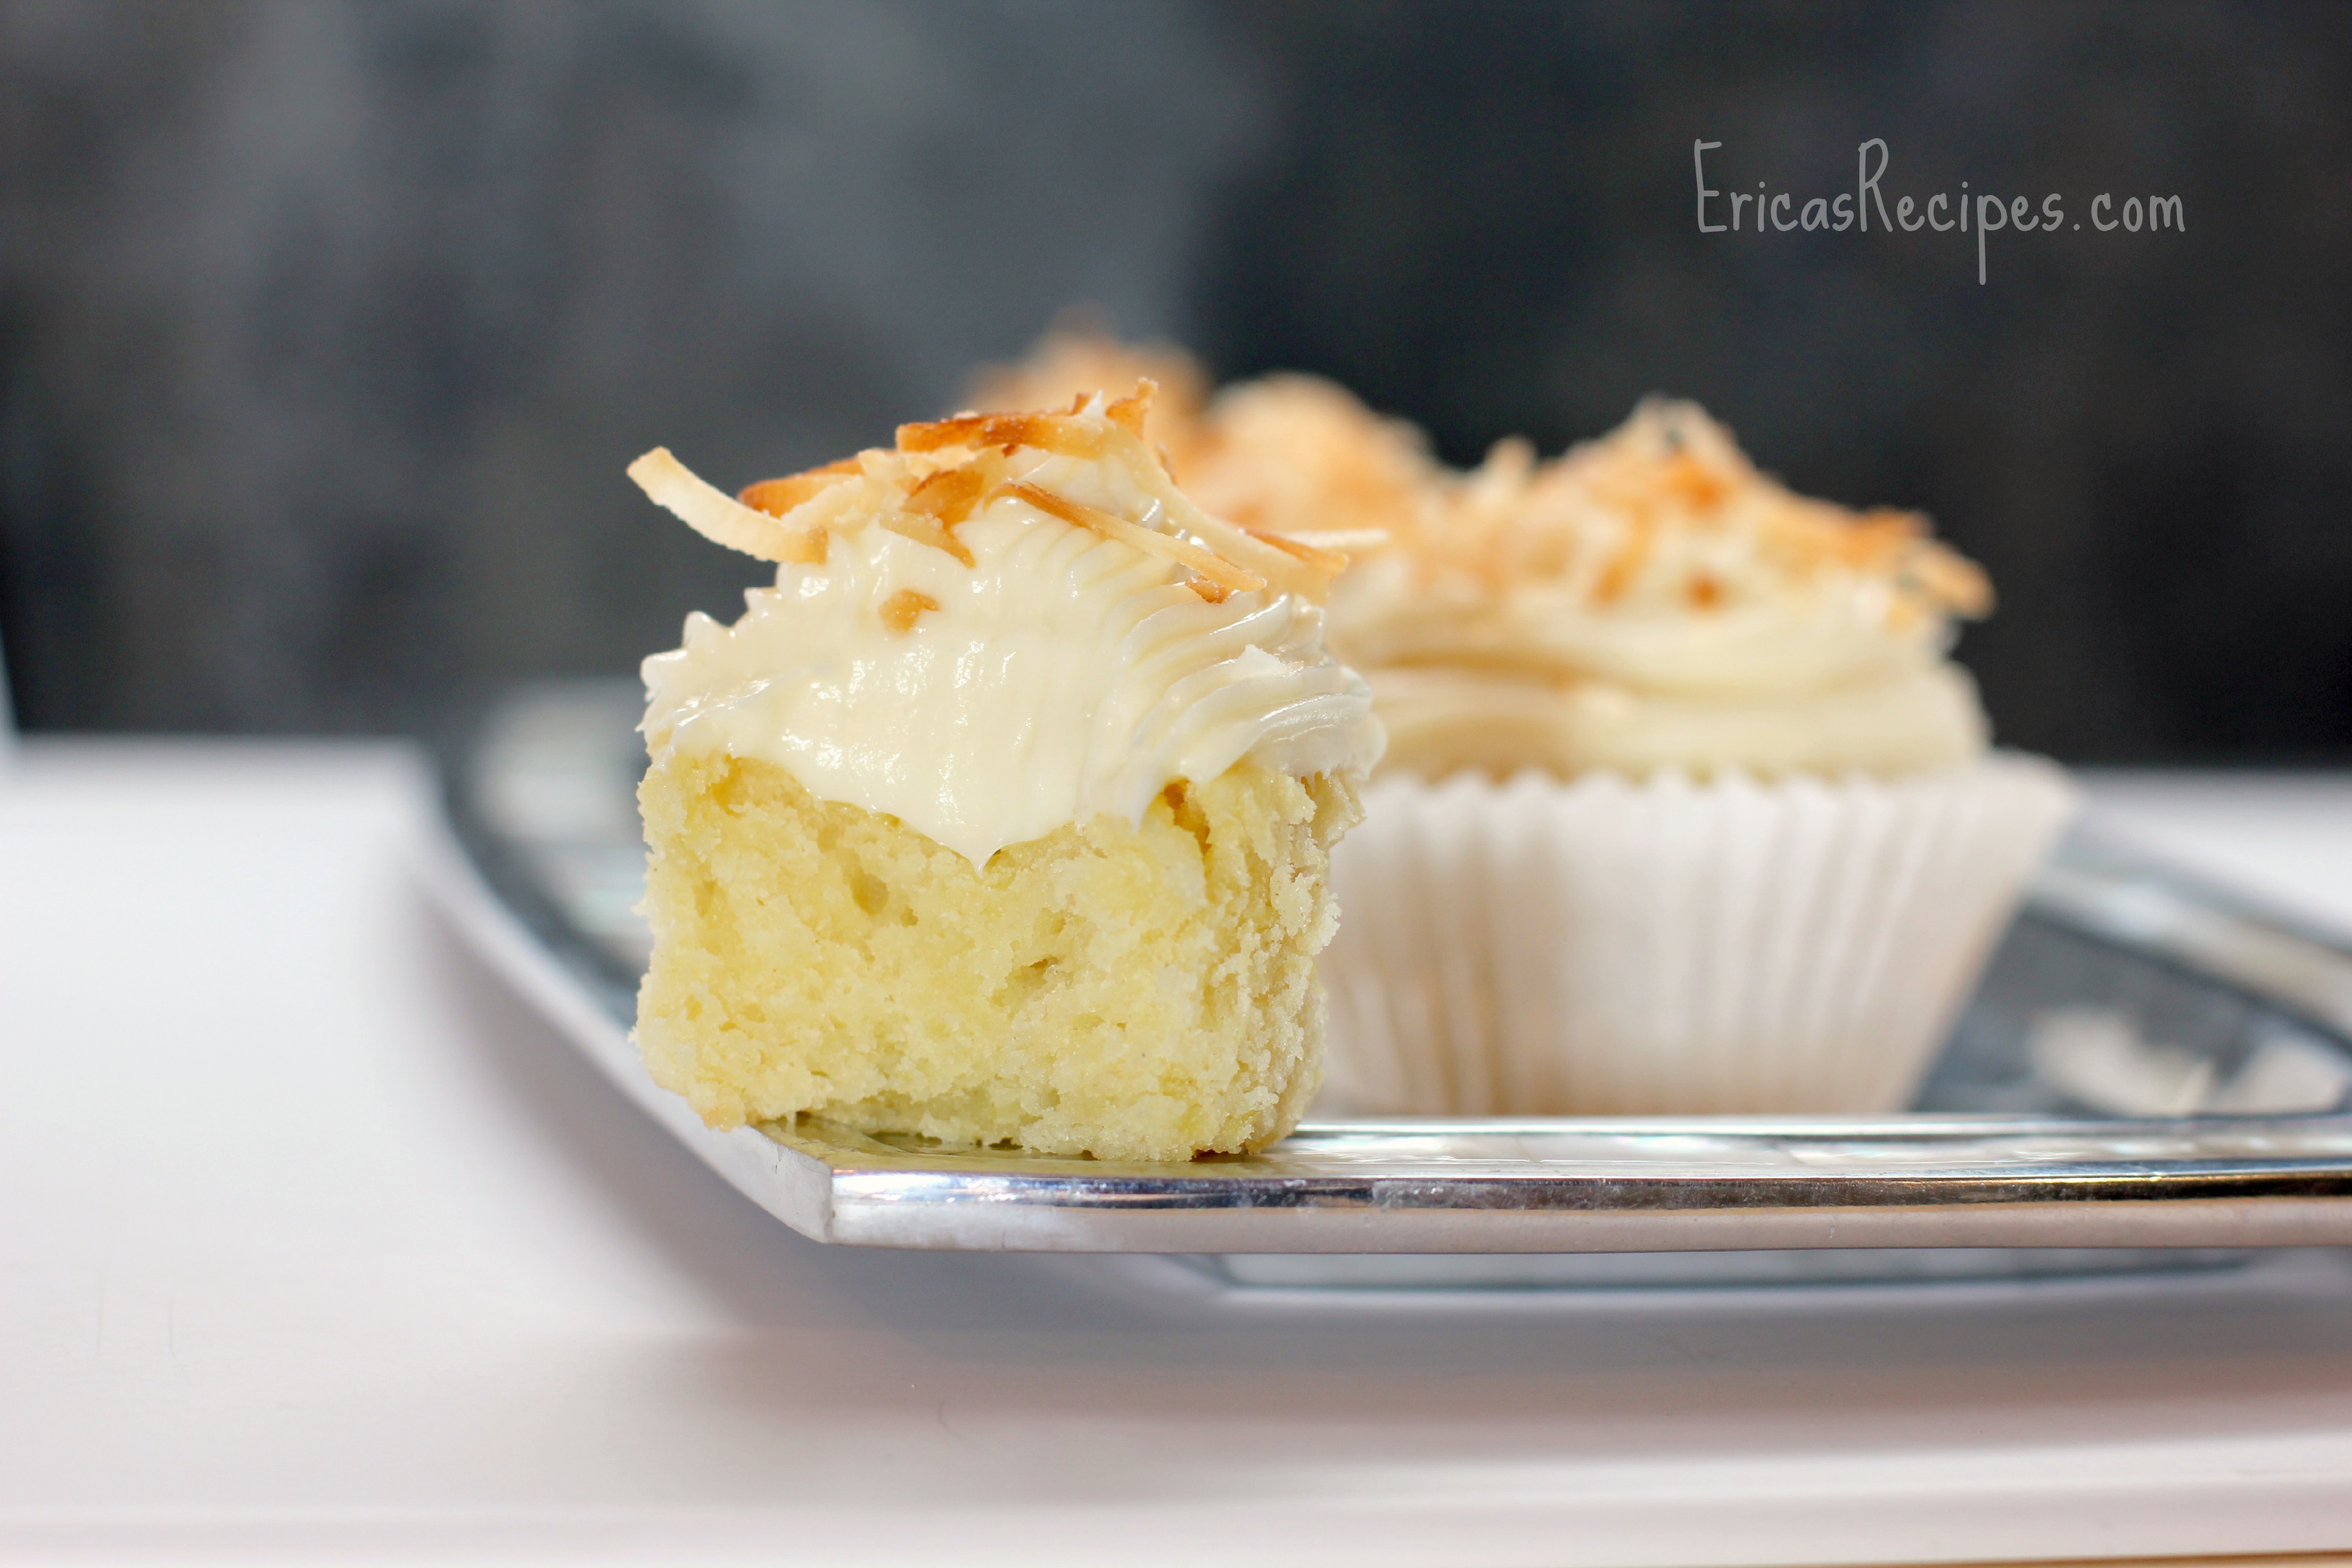 Pineapple Coconut Cake with Cream Cheese Frosting